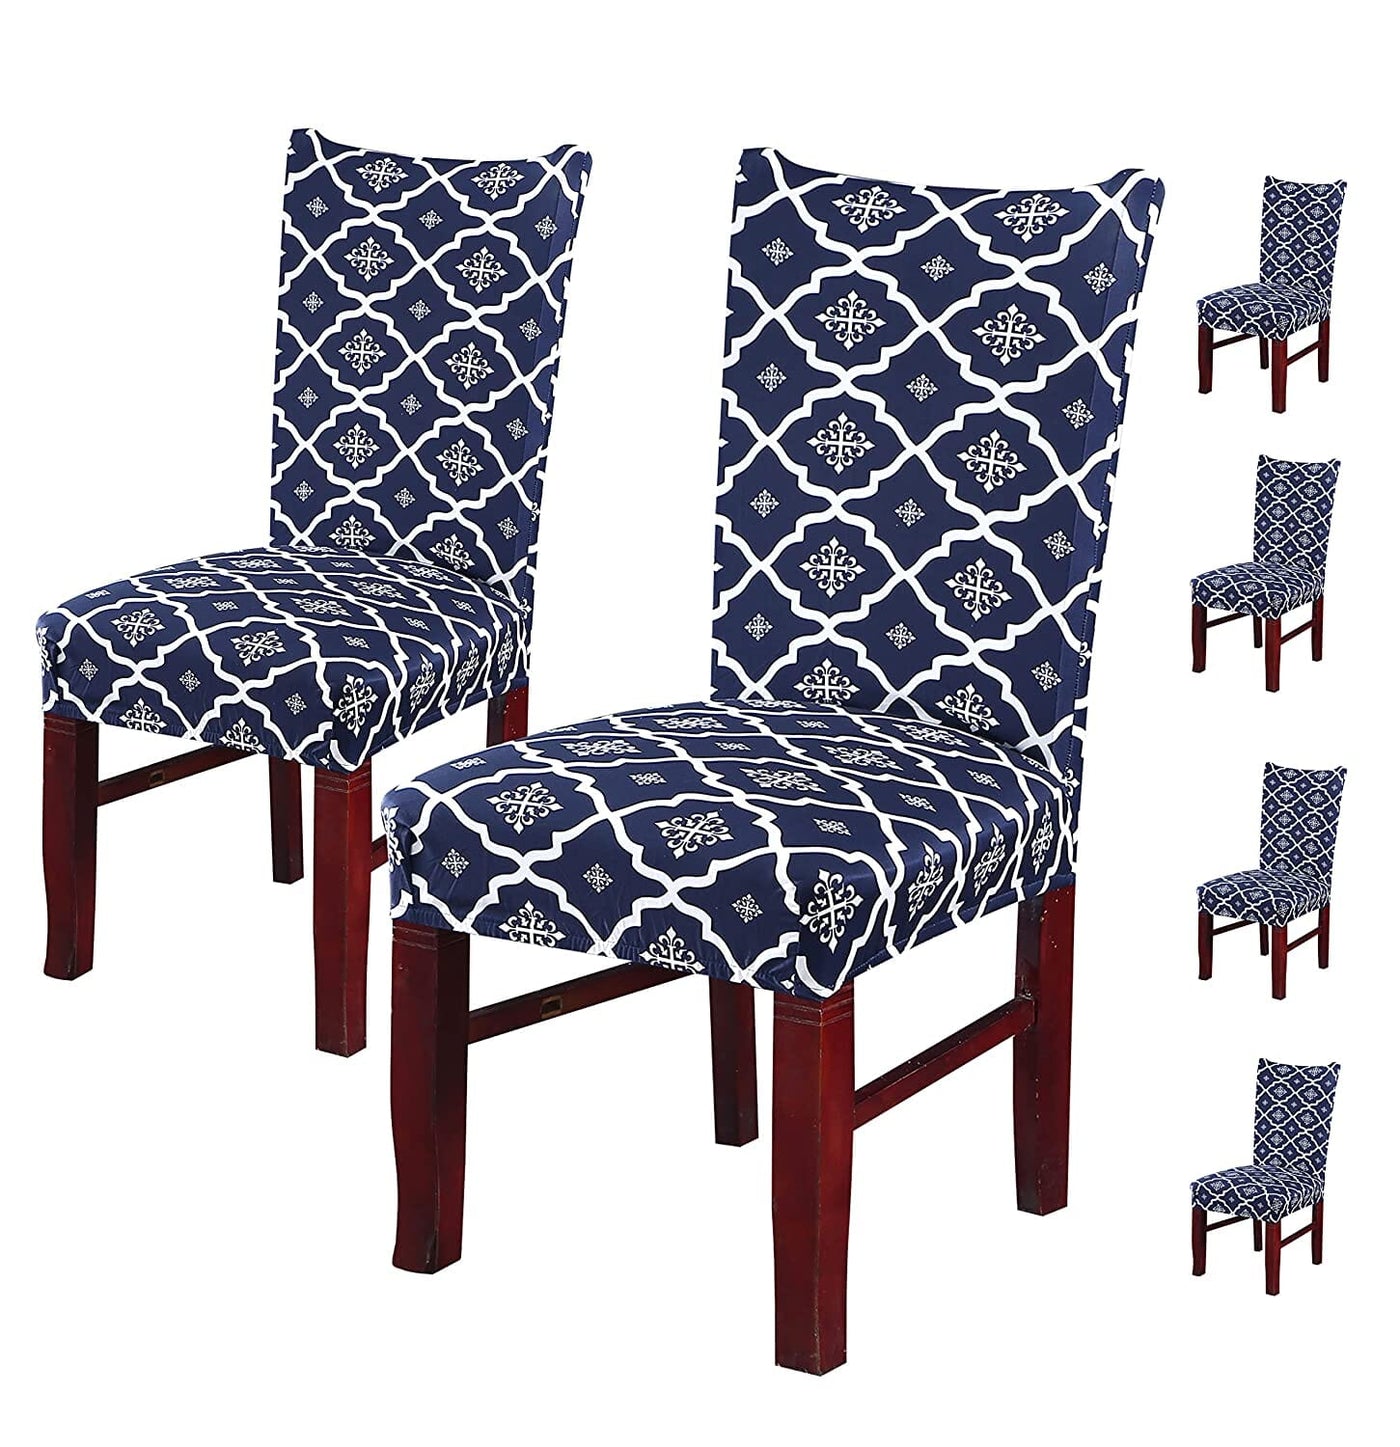 Jaipur Blue Premium Chair Cover - Stretchable & Elastic Fitted Great Happy IN 